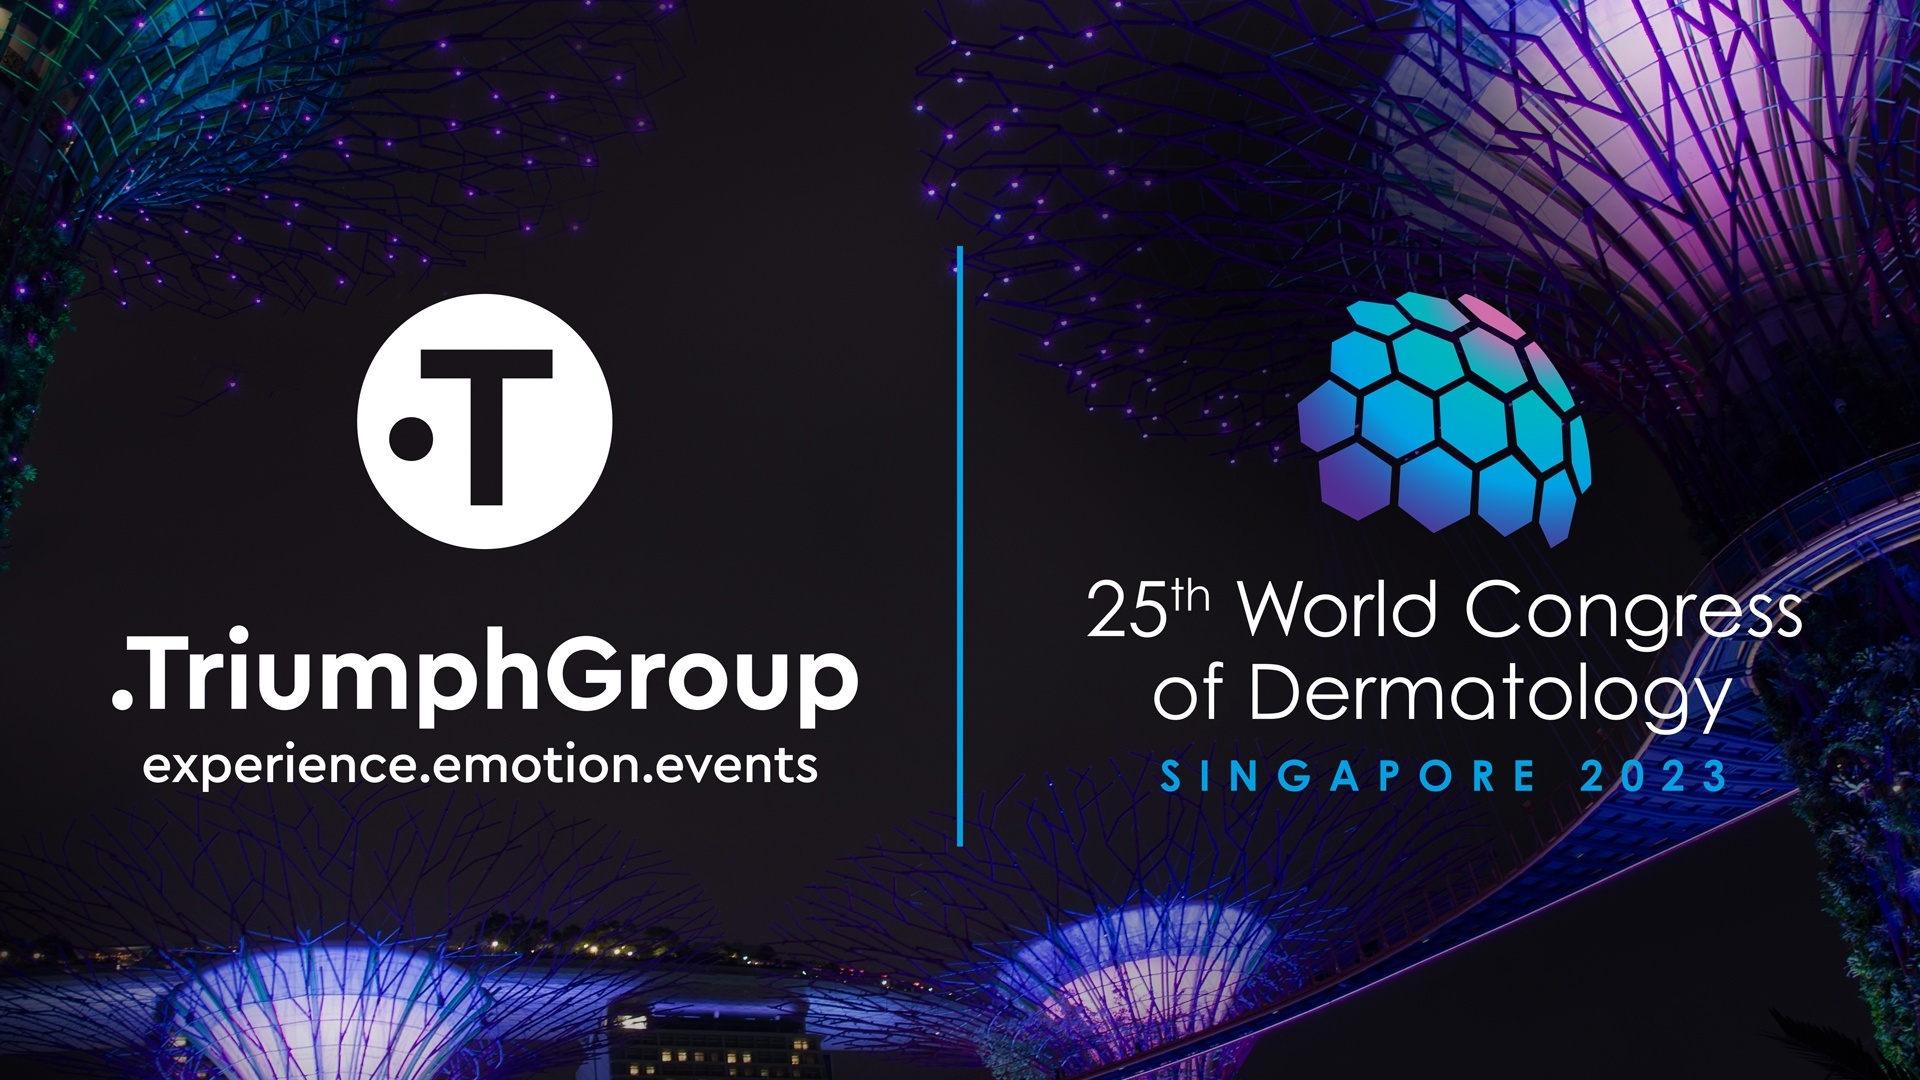 Triumph Group International wins the 25th World Congress of Dermatology in Singapore 2023